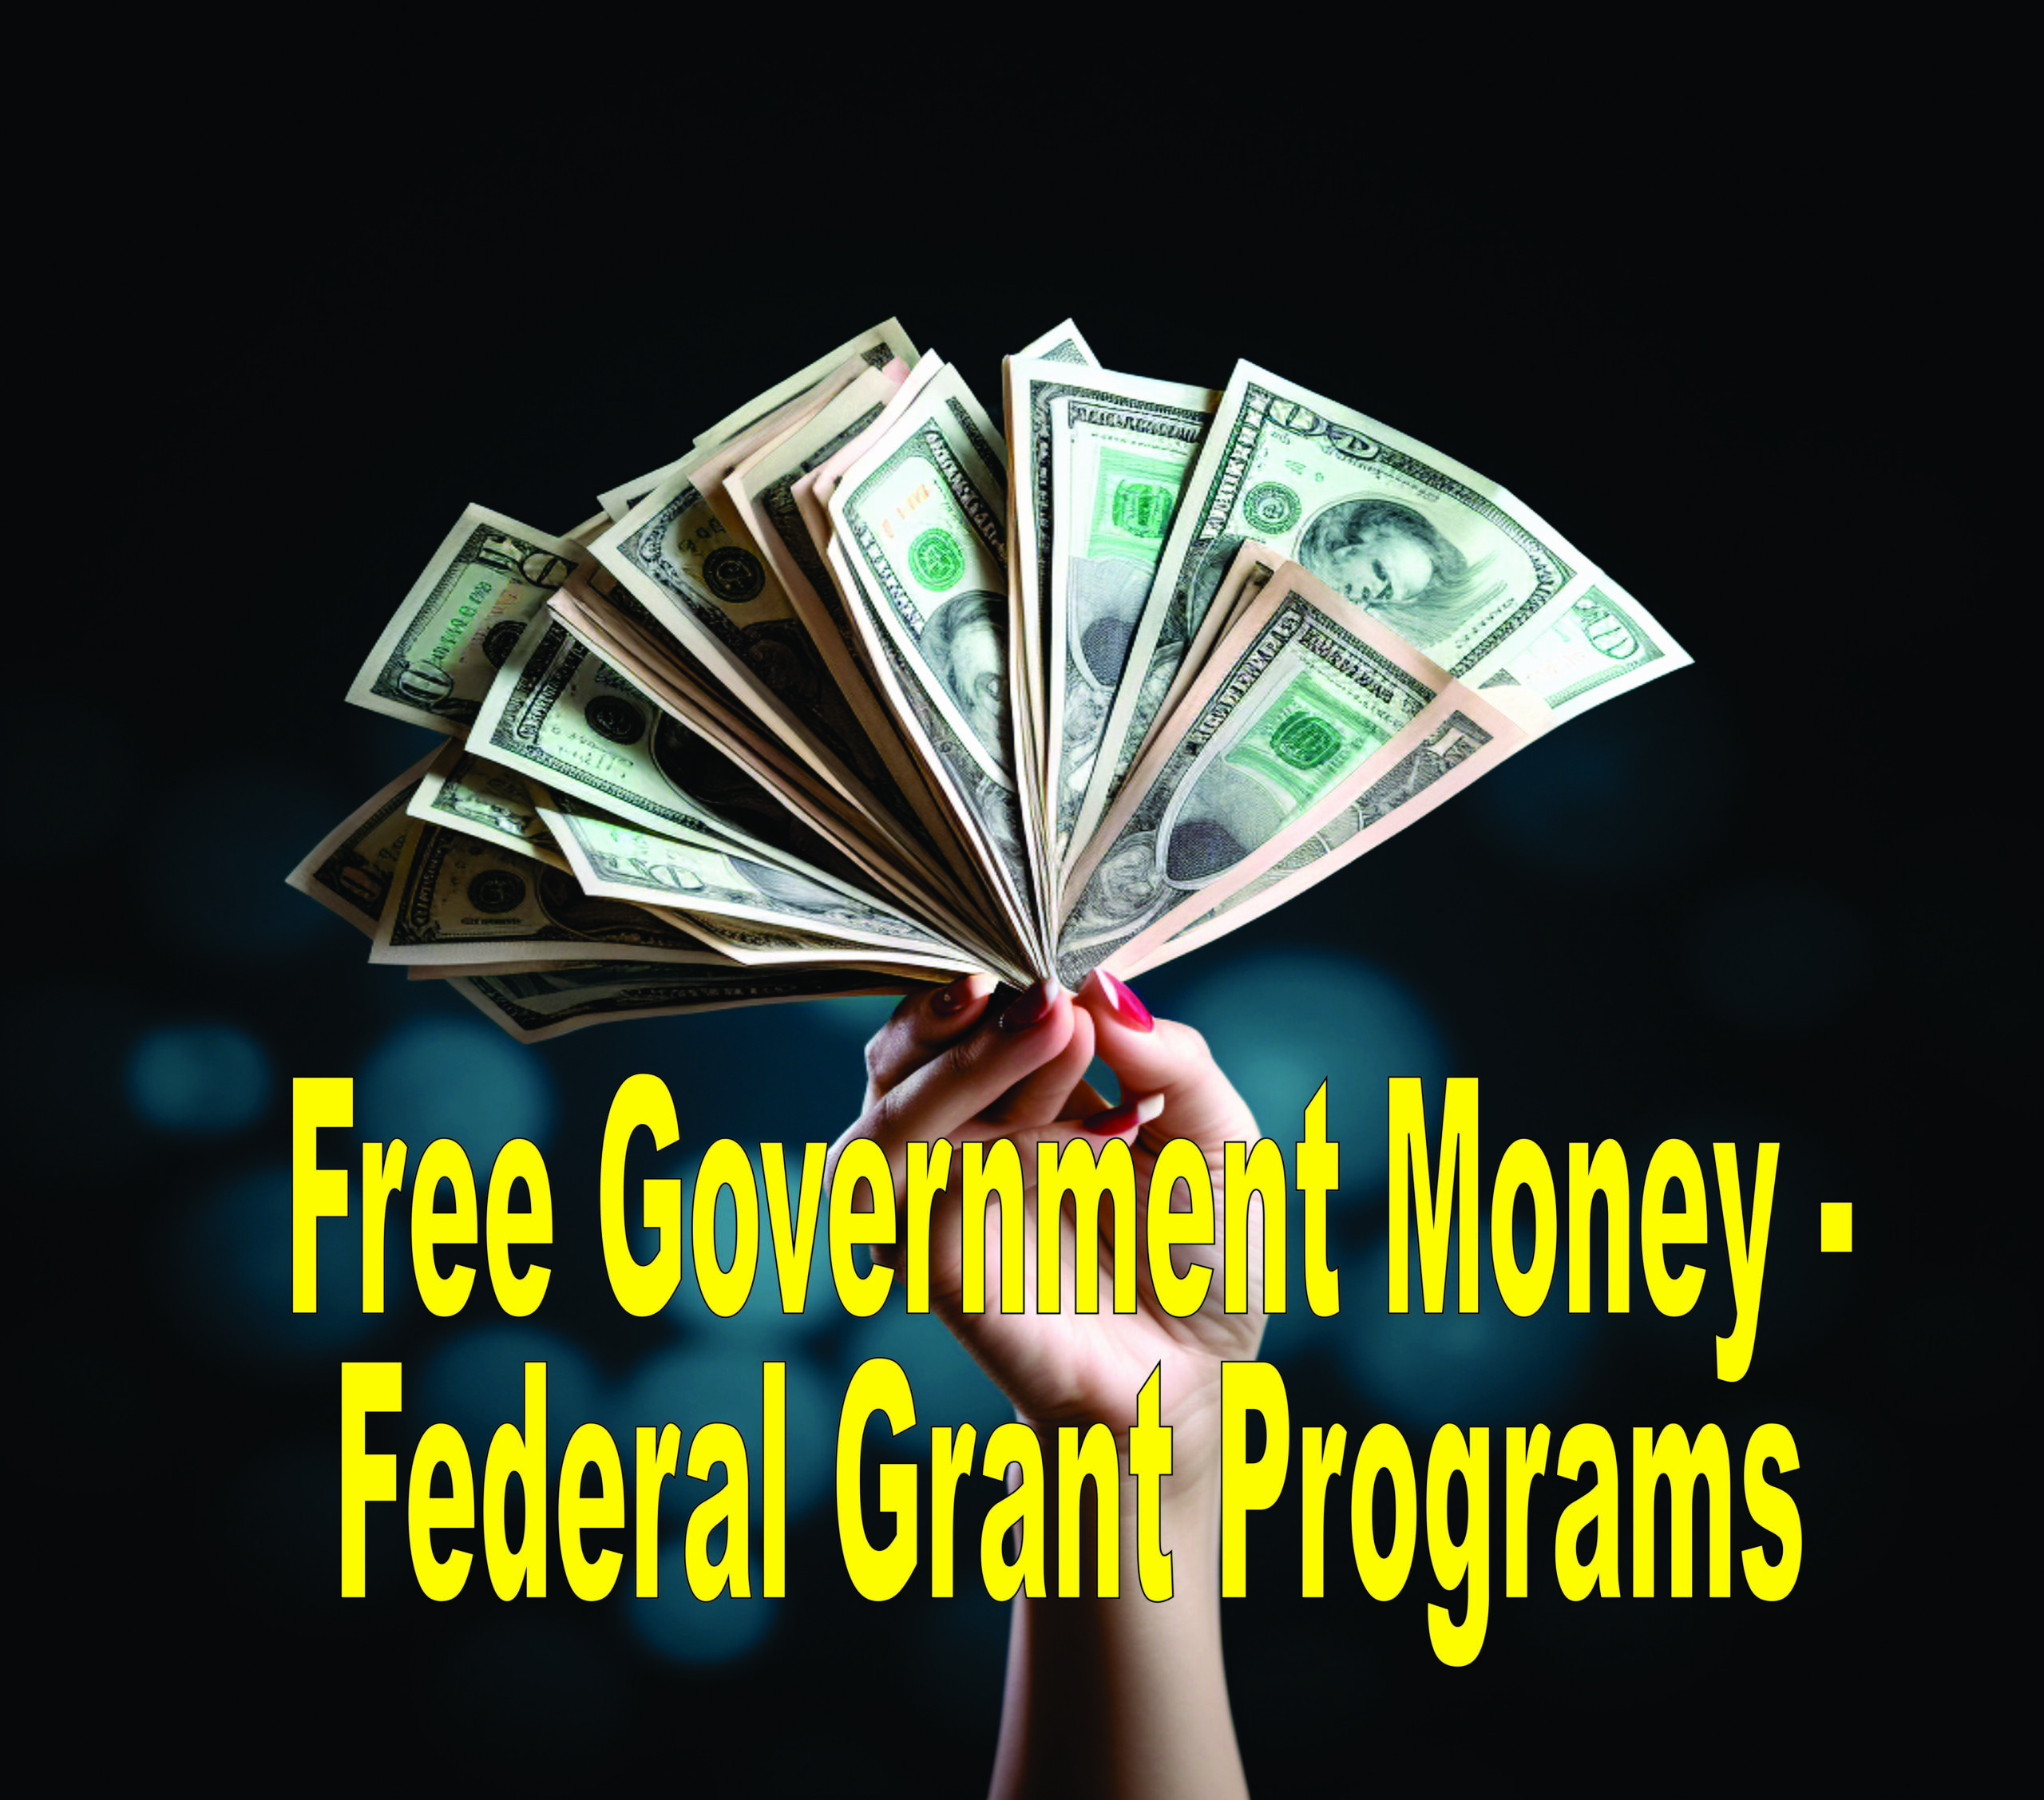 Free Government Money Federal Grant Programs